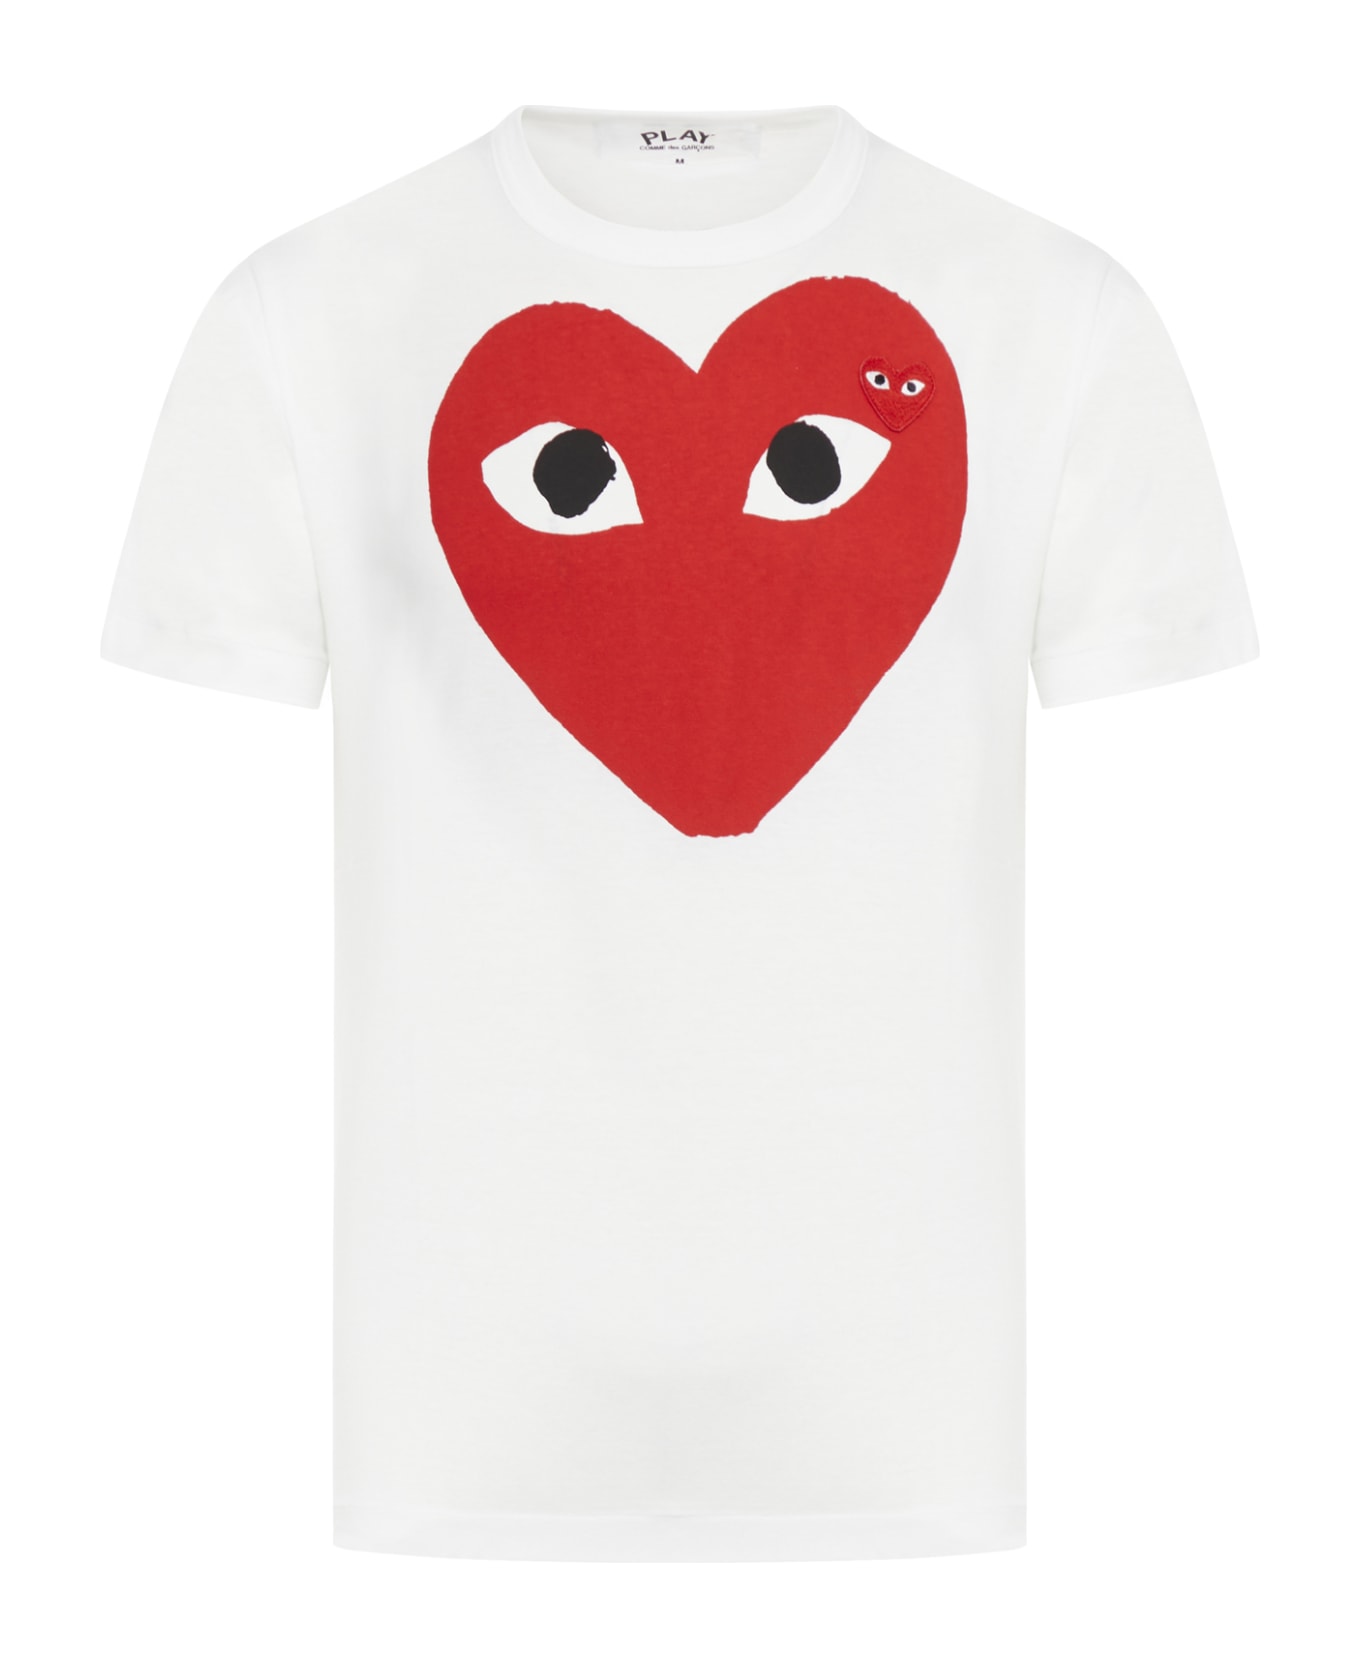 Comme des Garçons Play Play T-shirt Red Heart - White シャツ